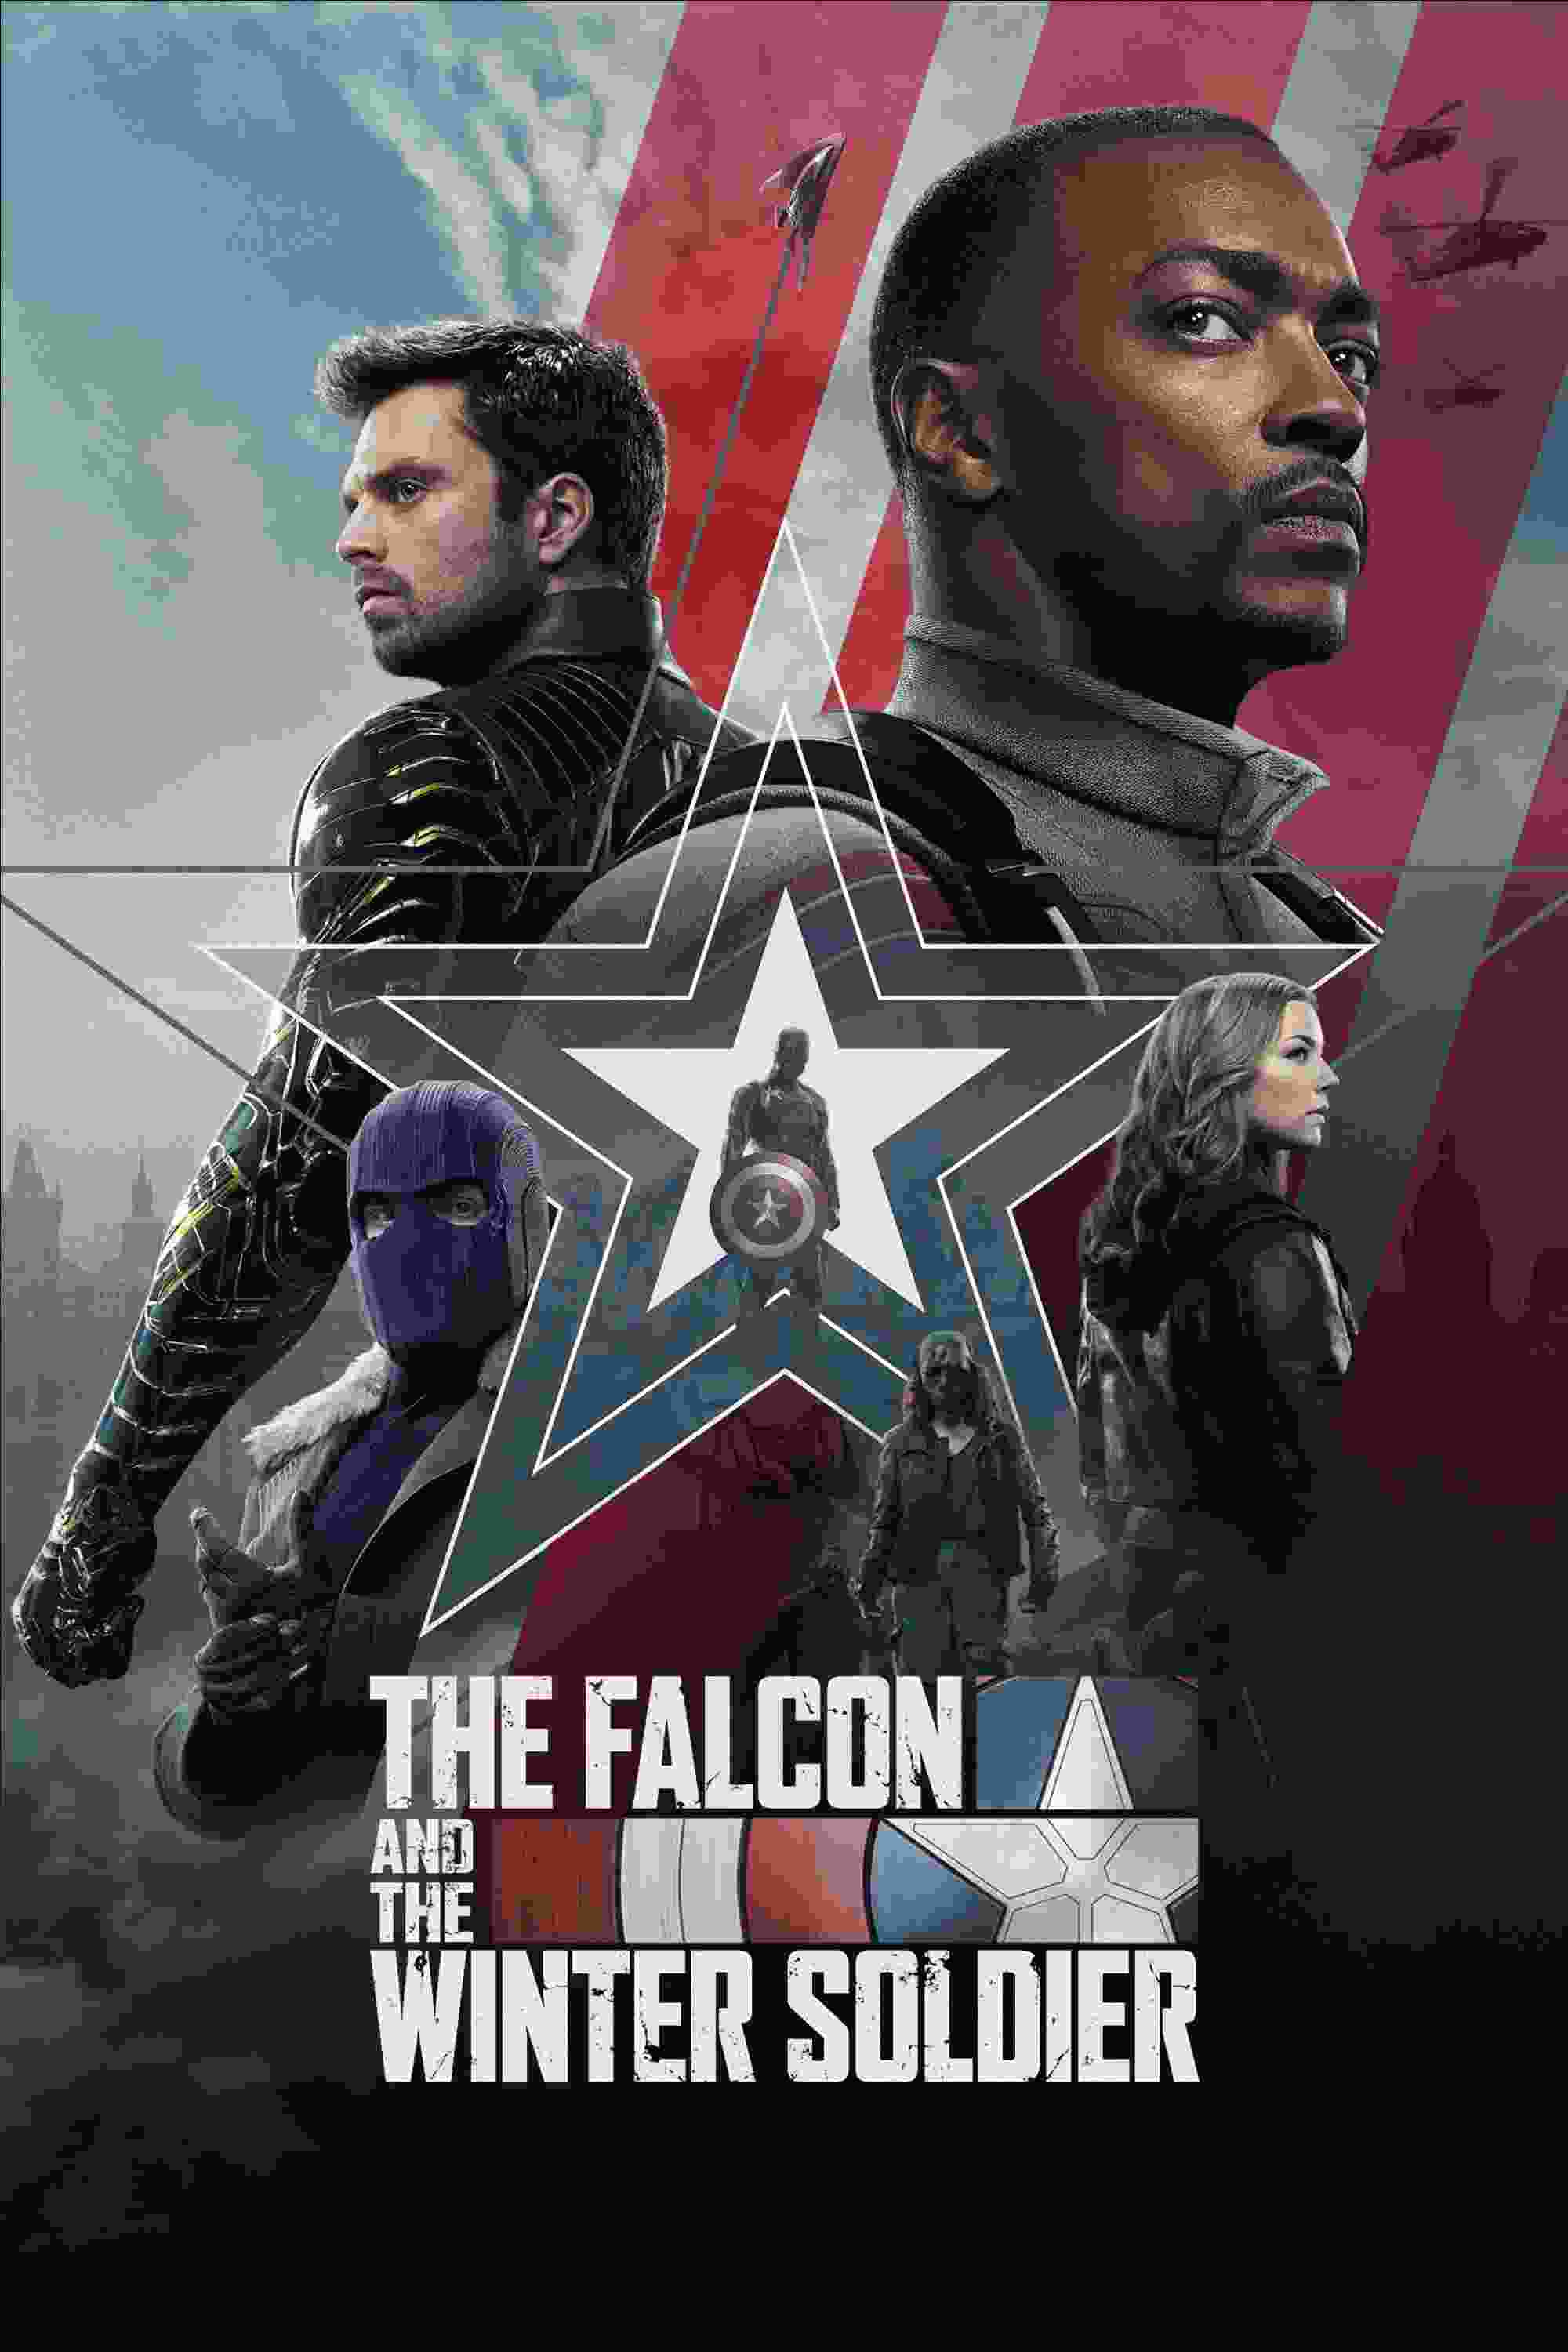 The Falcon and the Winter Soldier (TV Series 2021–2021) vj ice p Anthony Mackie